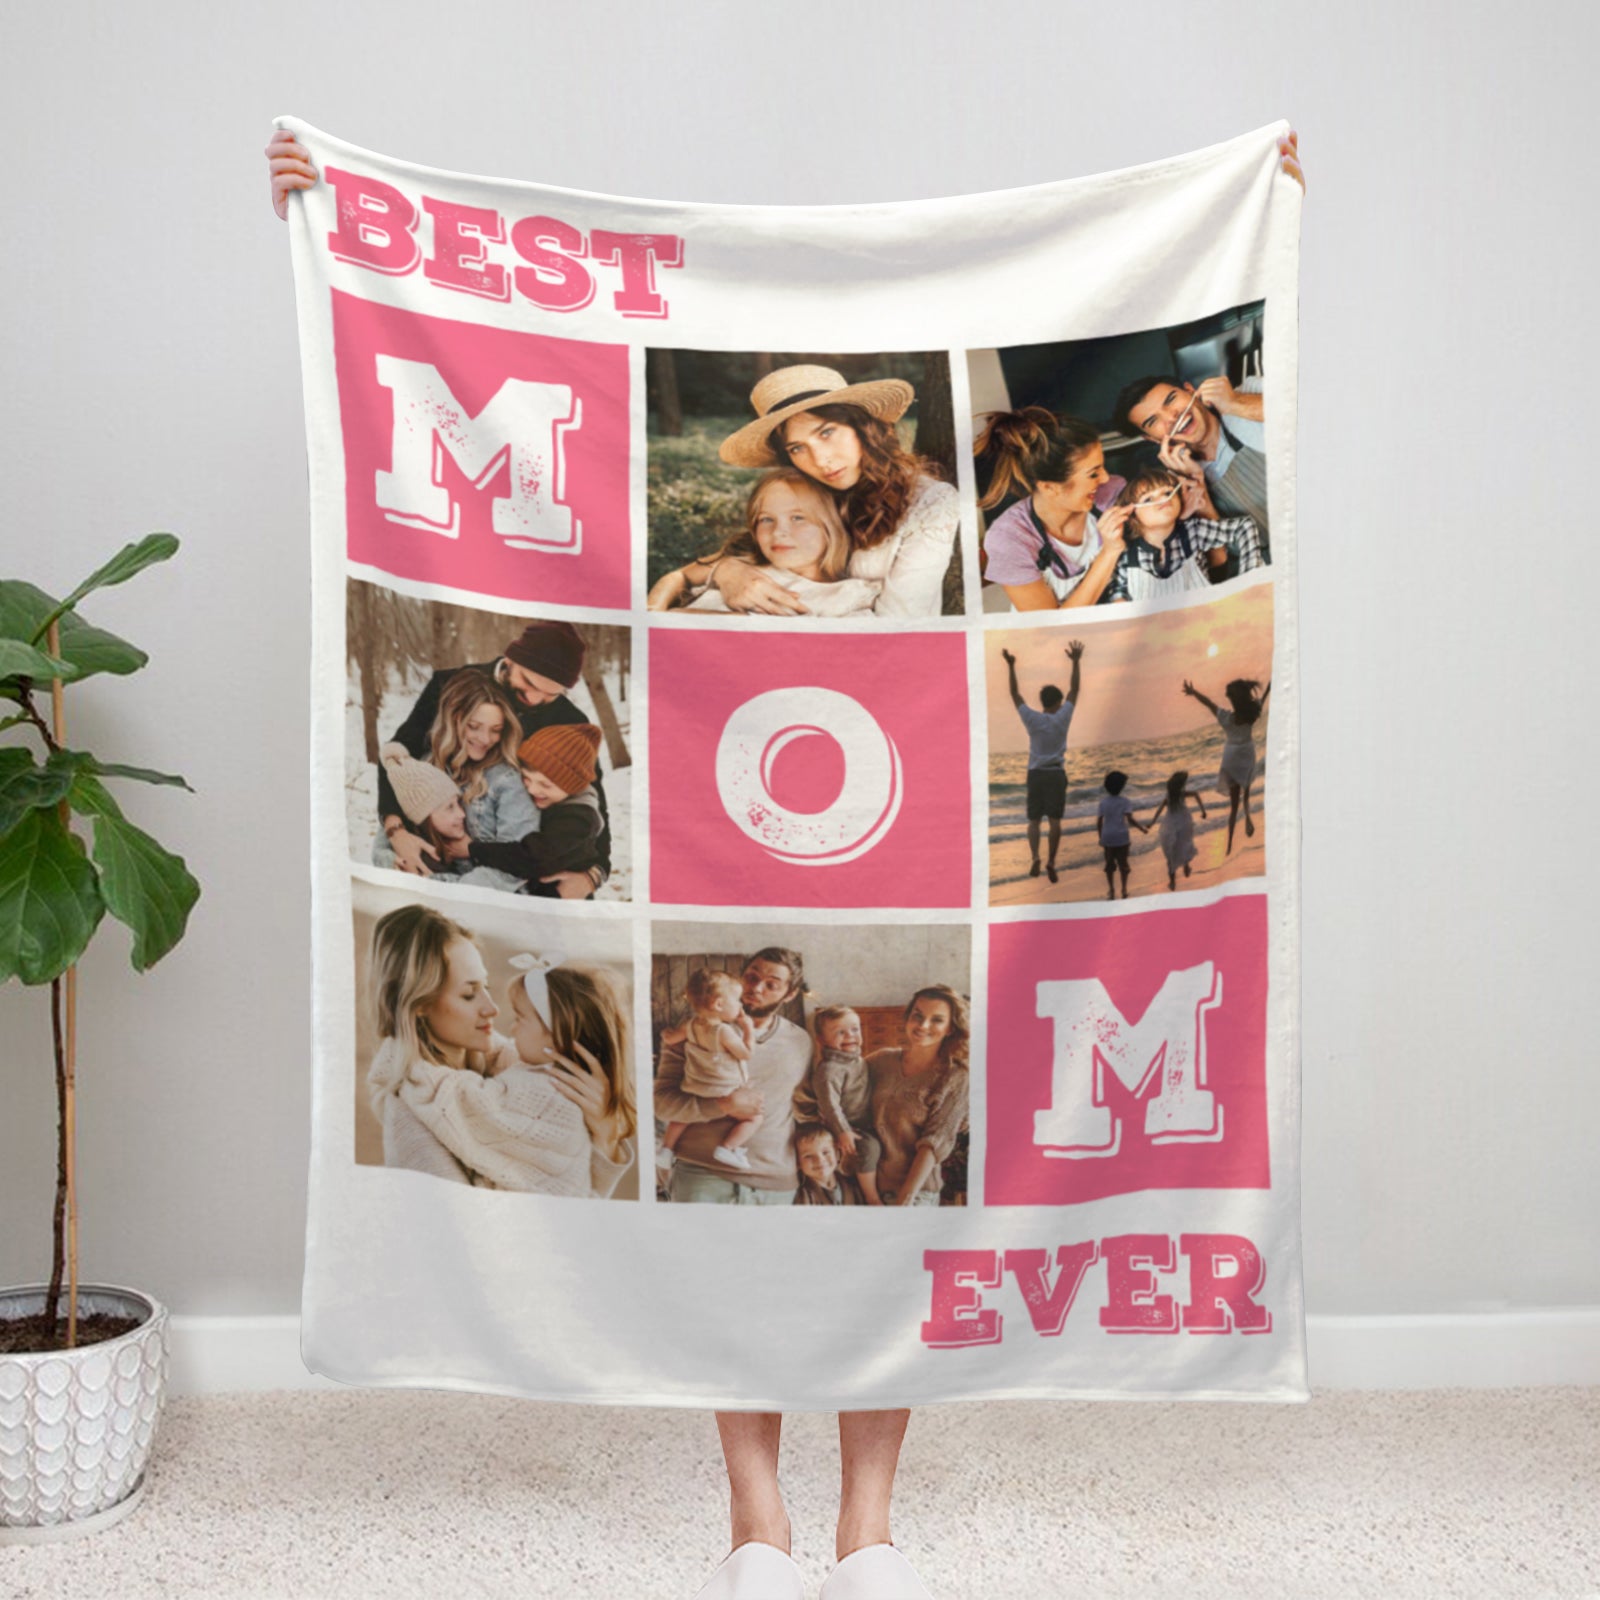 Personalized "Best Mom Ever" blanket with photo - perfect gift for Mother's Day and Birthdays - colorfulcustom